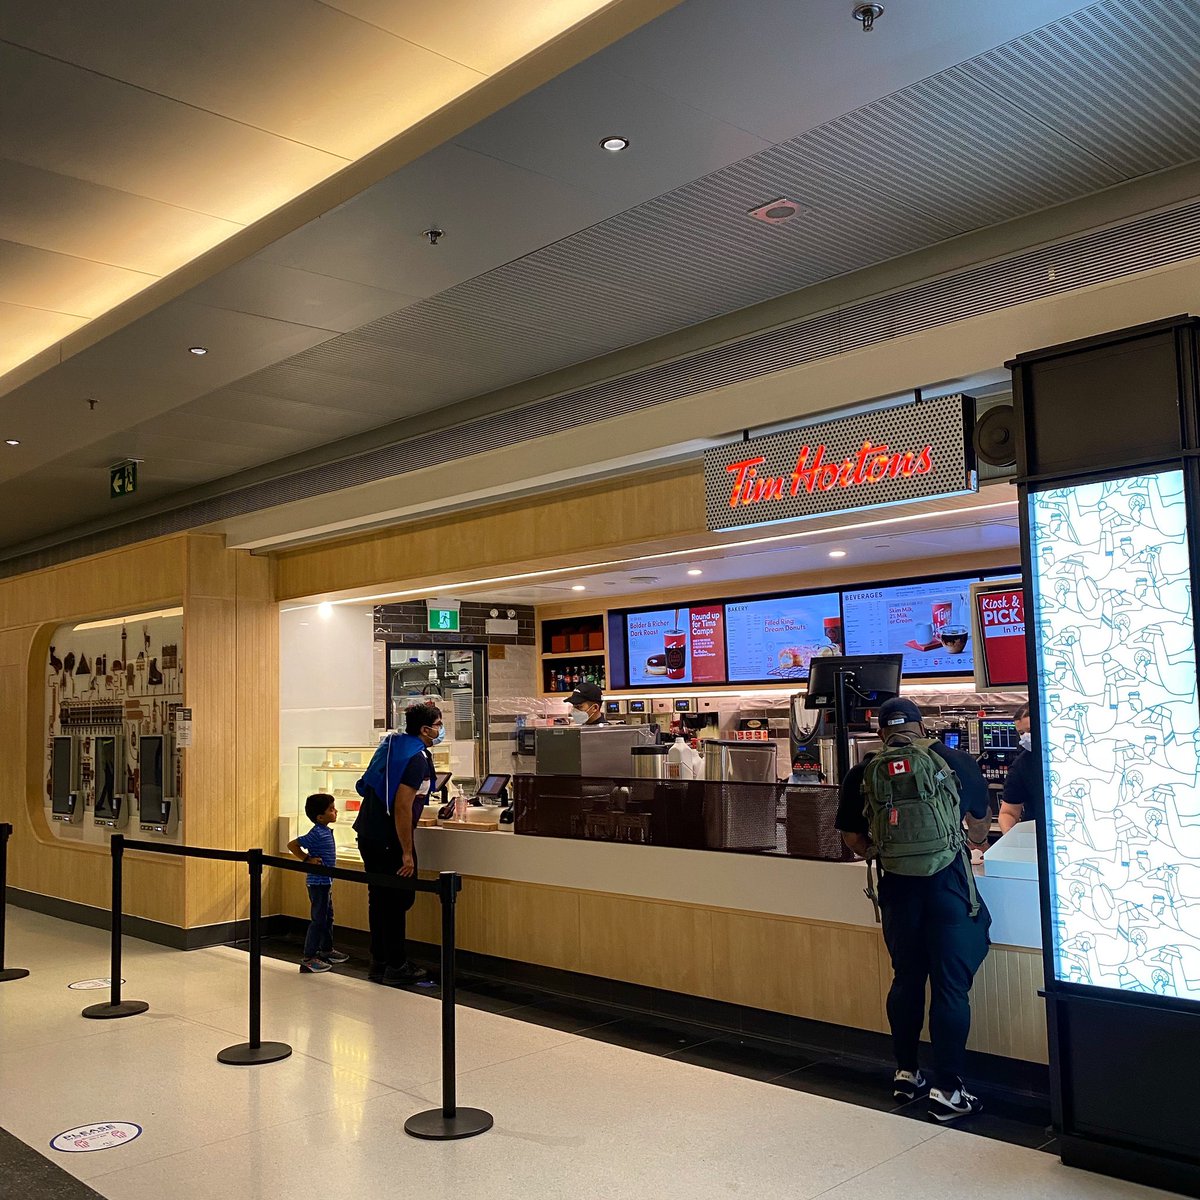 Union Station on Twitter: "New week, new coffee spot. Find @TimHortons in the new GO Bay Concourse ☕️ https://t.co/UWPI2diuMp" / Twitter